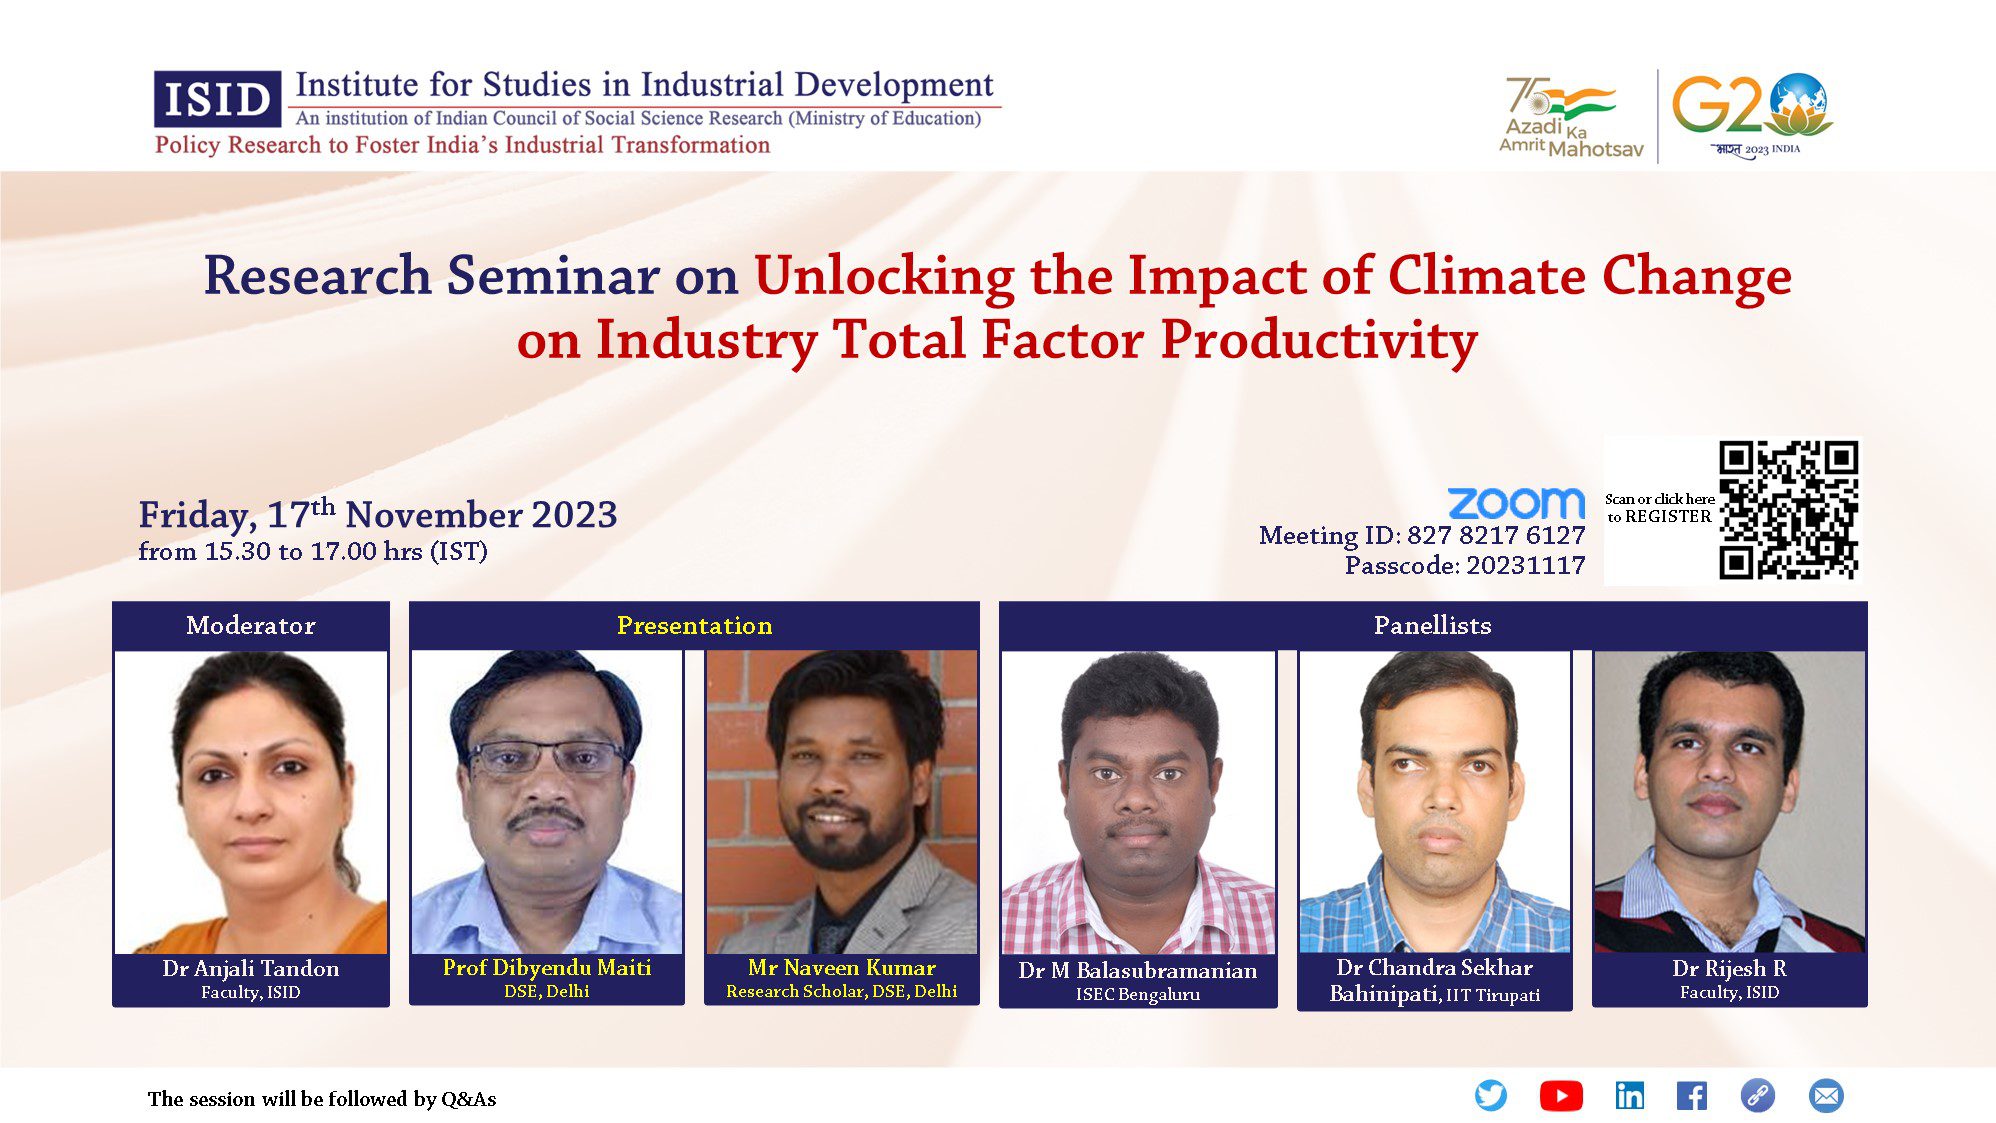 Research Seminar on Unlocking the Impact of Climate Change on Industry Total Factor Productivity